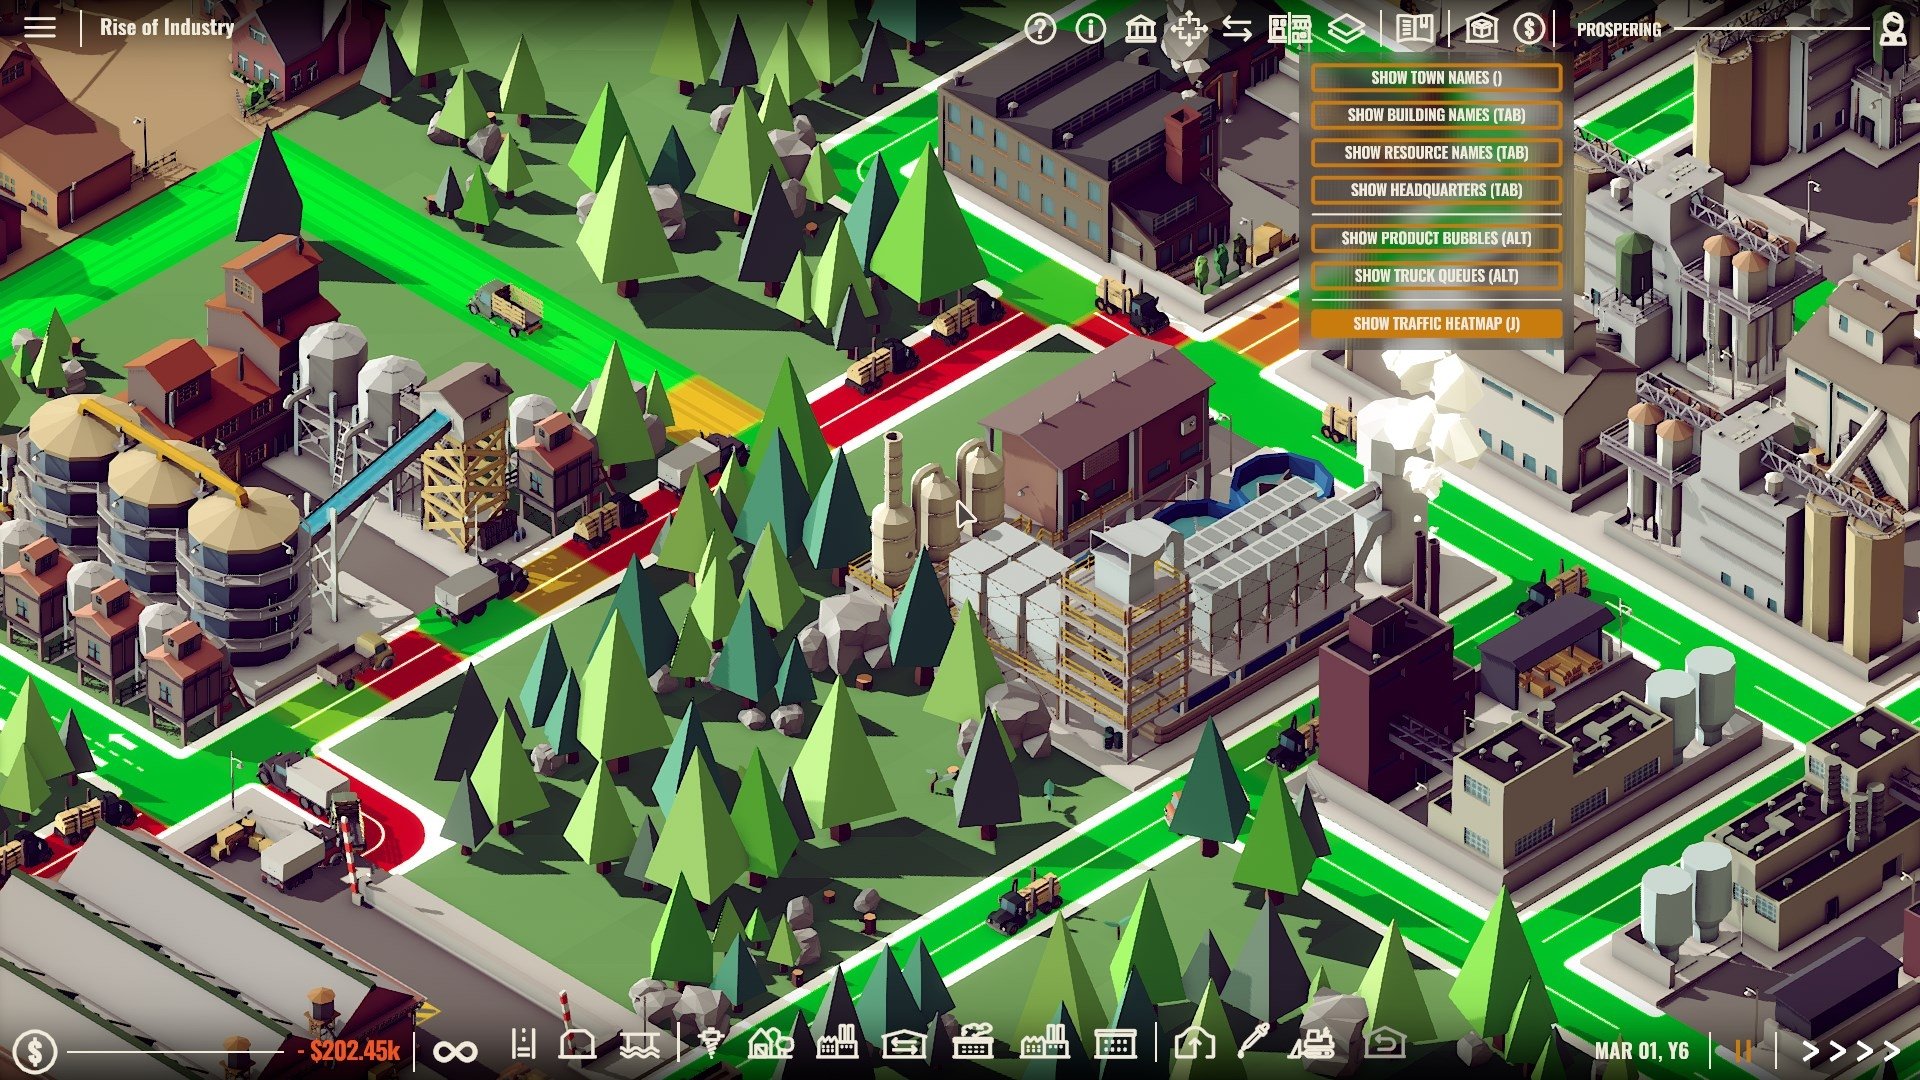 Screenshot for the game Rise of Industry